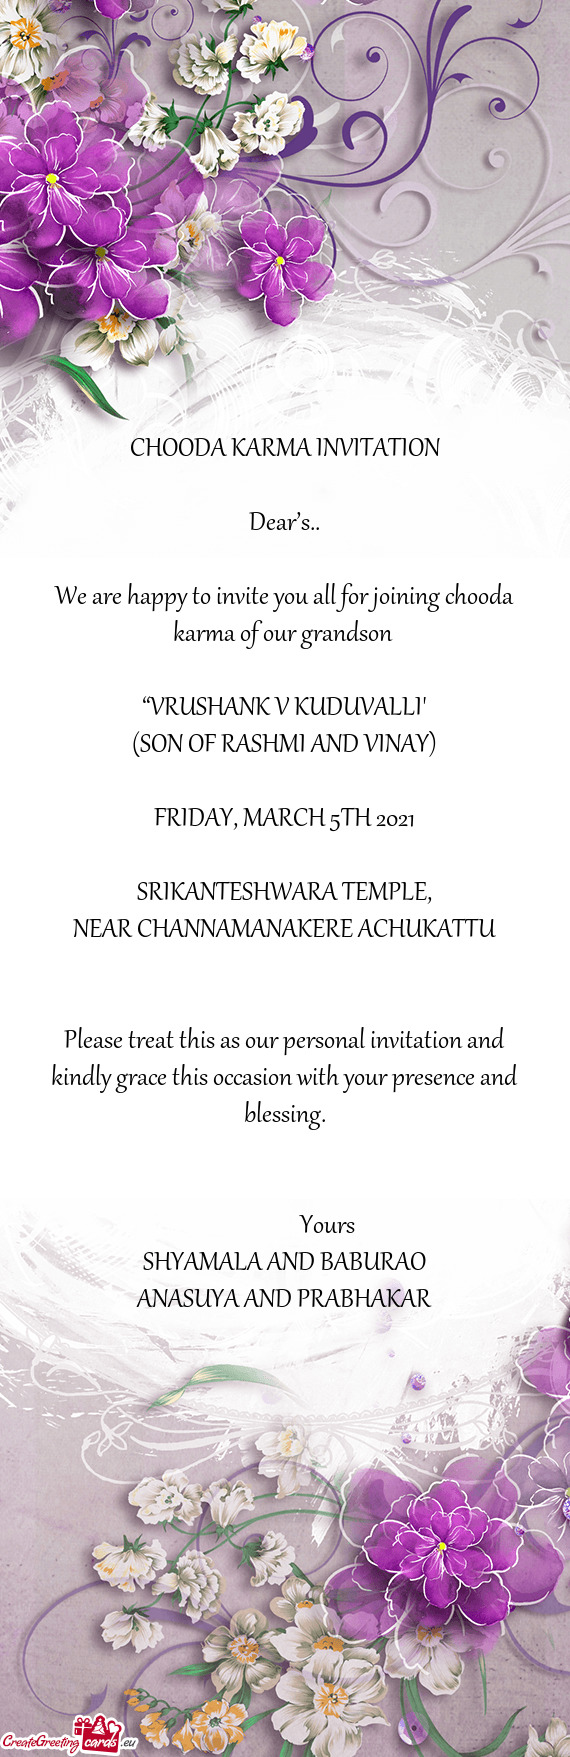 We are happy to invite you all for joining chooda karma of our grandson